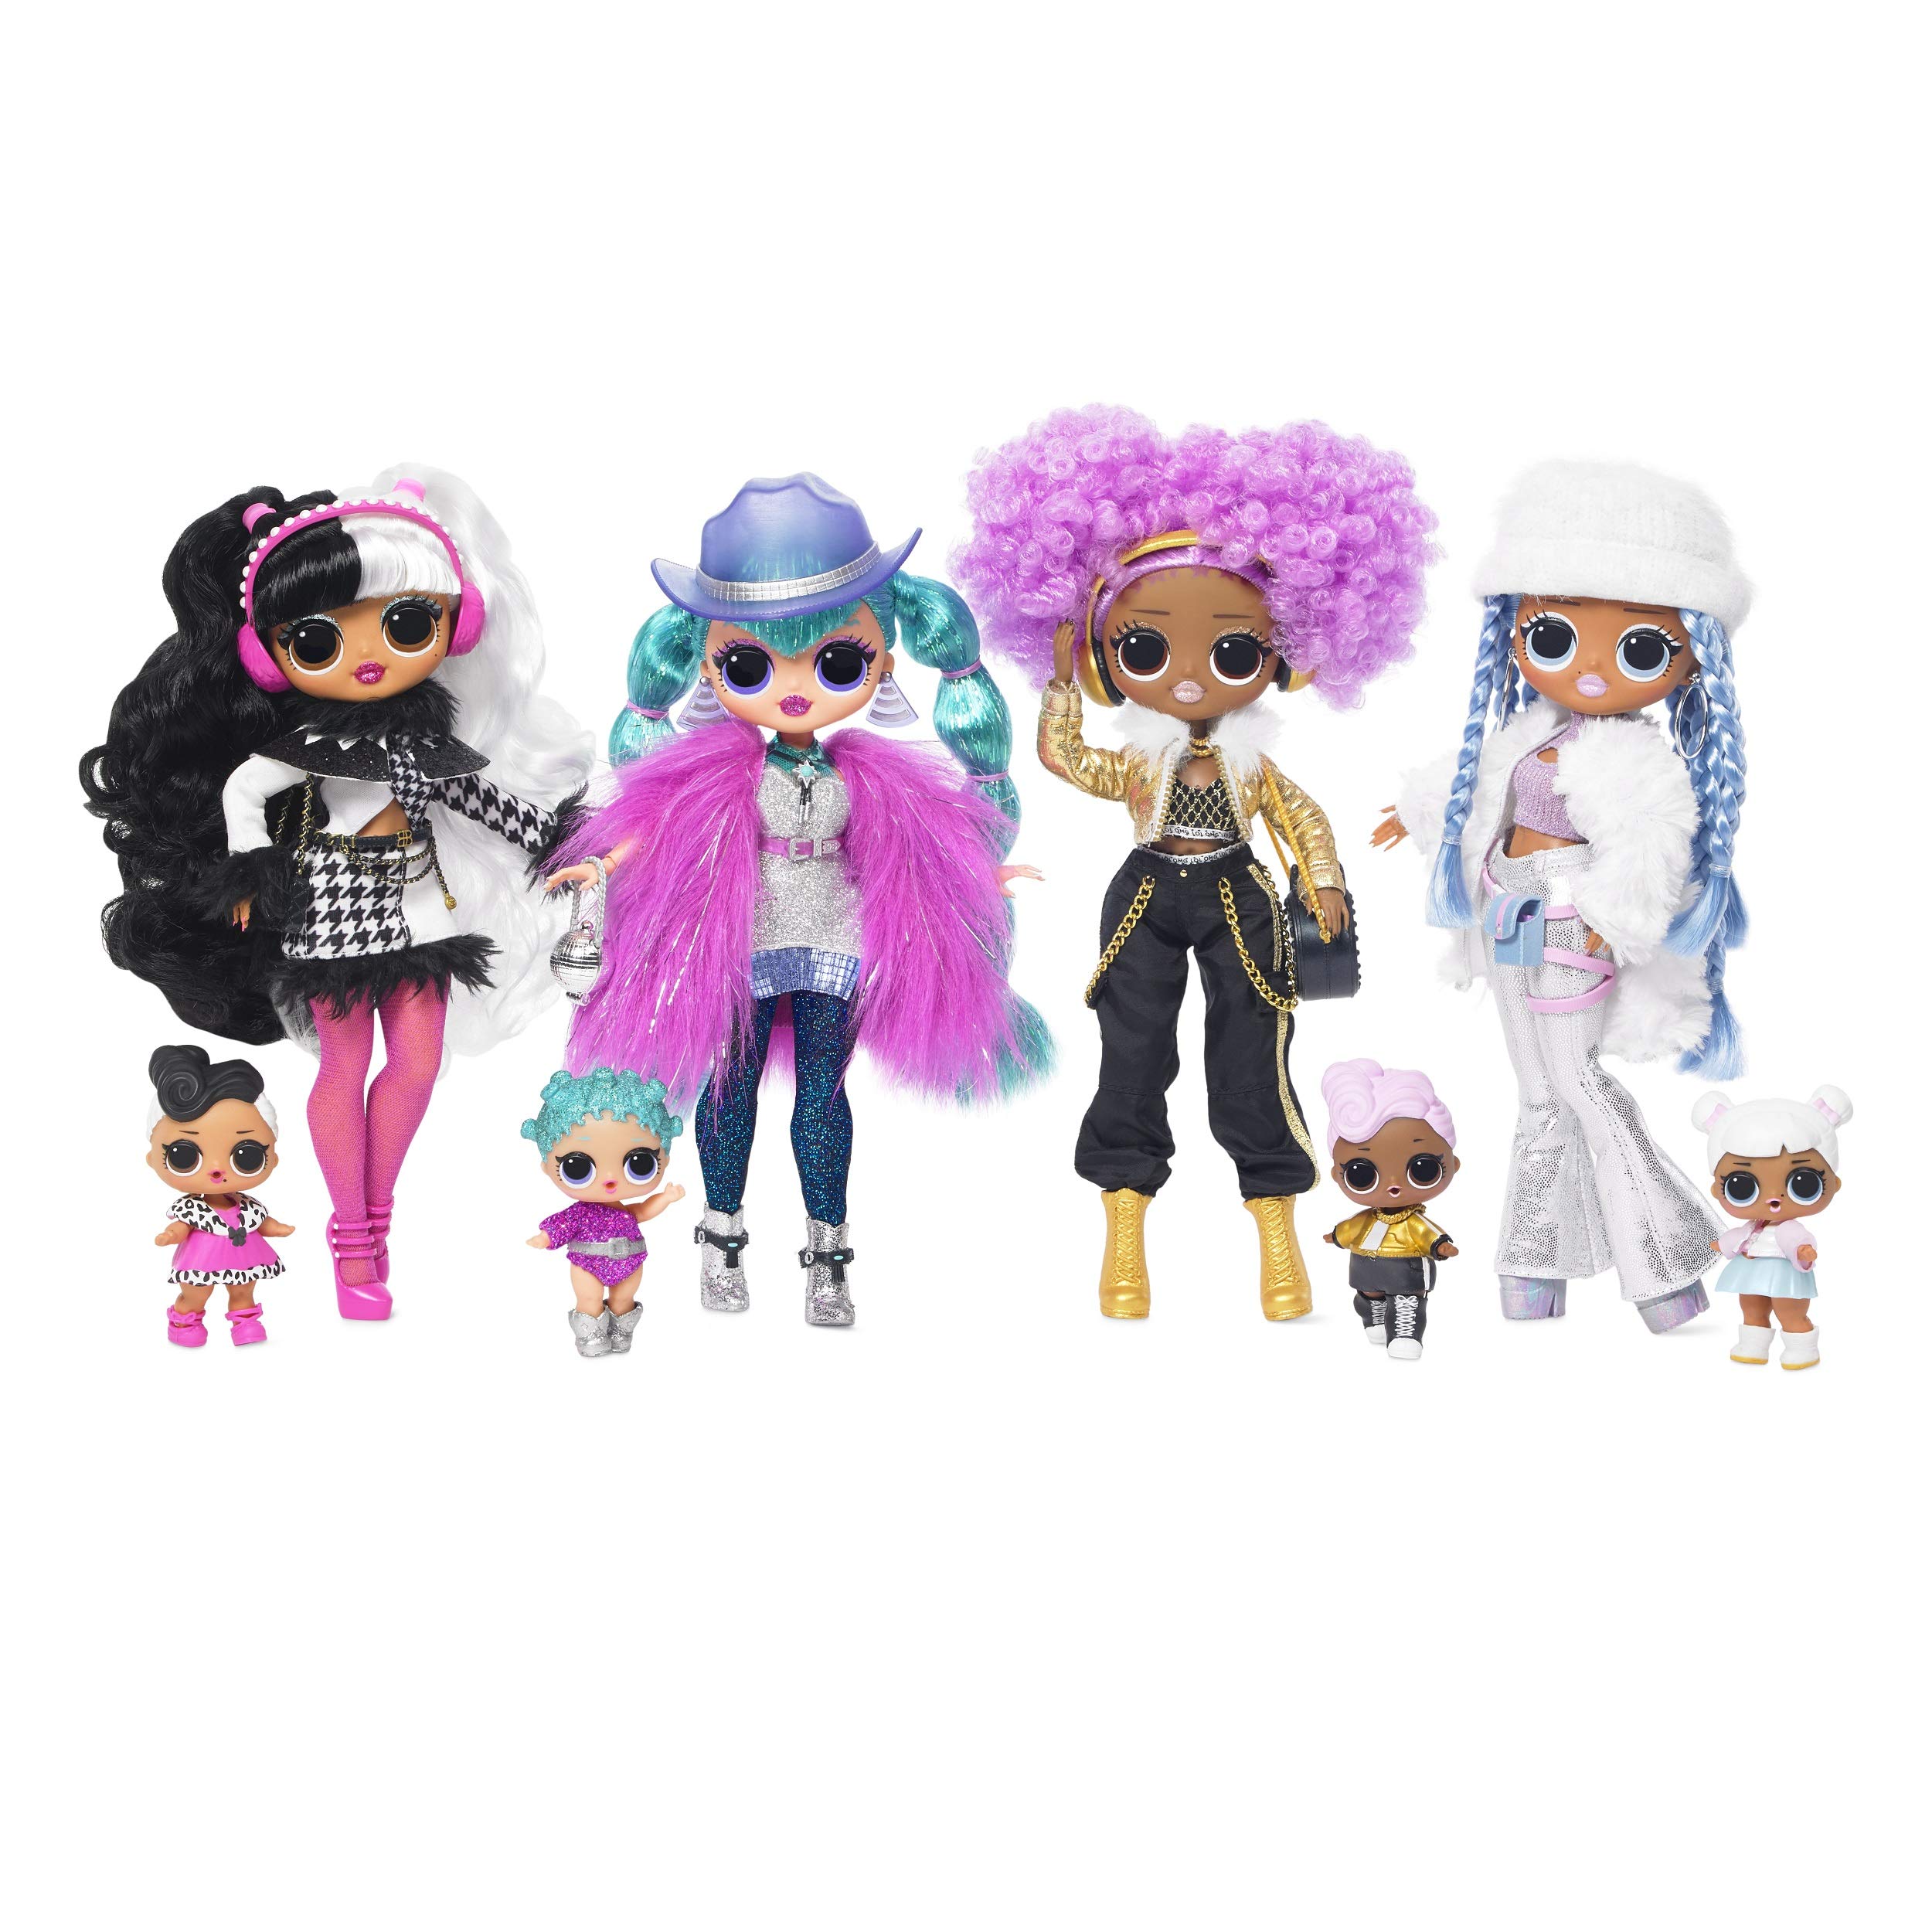 LOL Surprise OMG Winter Disco Series With Exclusive Dollie Fashion Doll And 25 Surprises Including Her Little Sister Dollface, Fashions, Shoes, Purse, Fur Shawl, Ear Muffs And More | Kids Ages 6-10